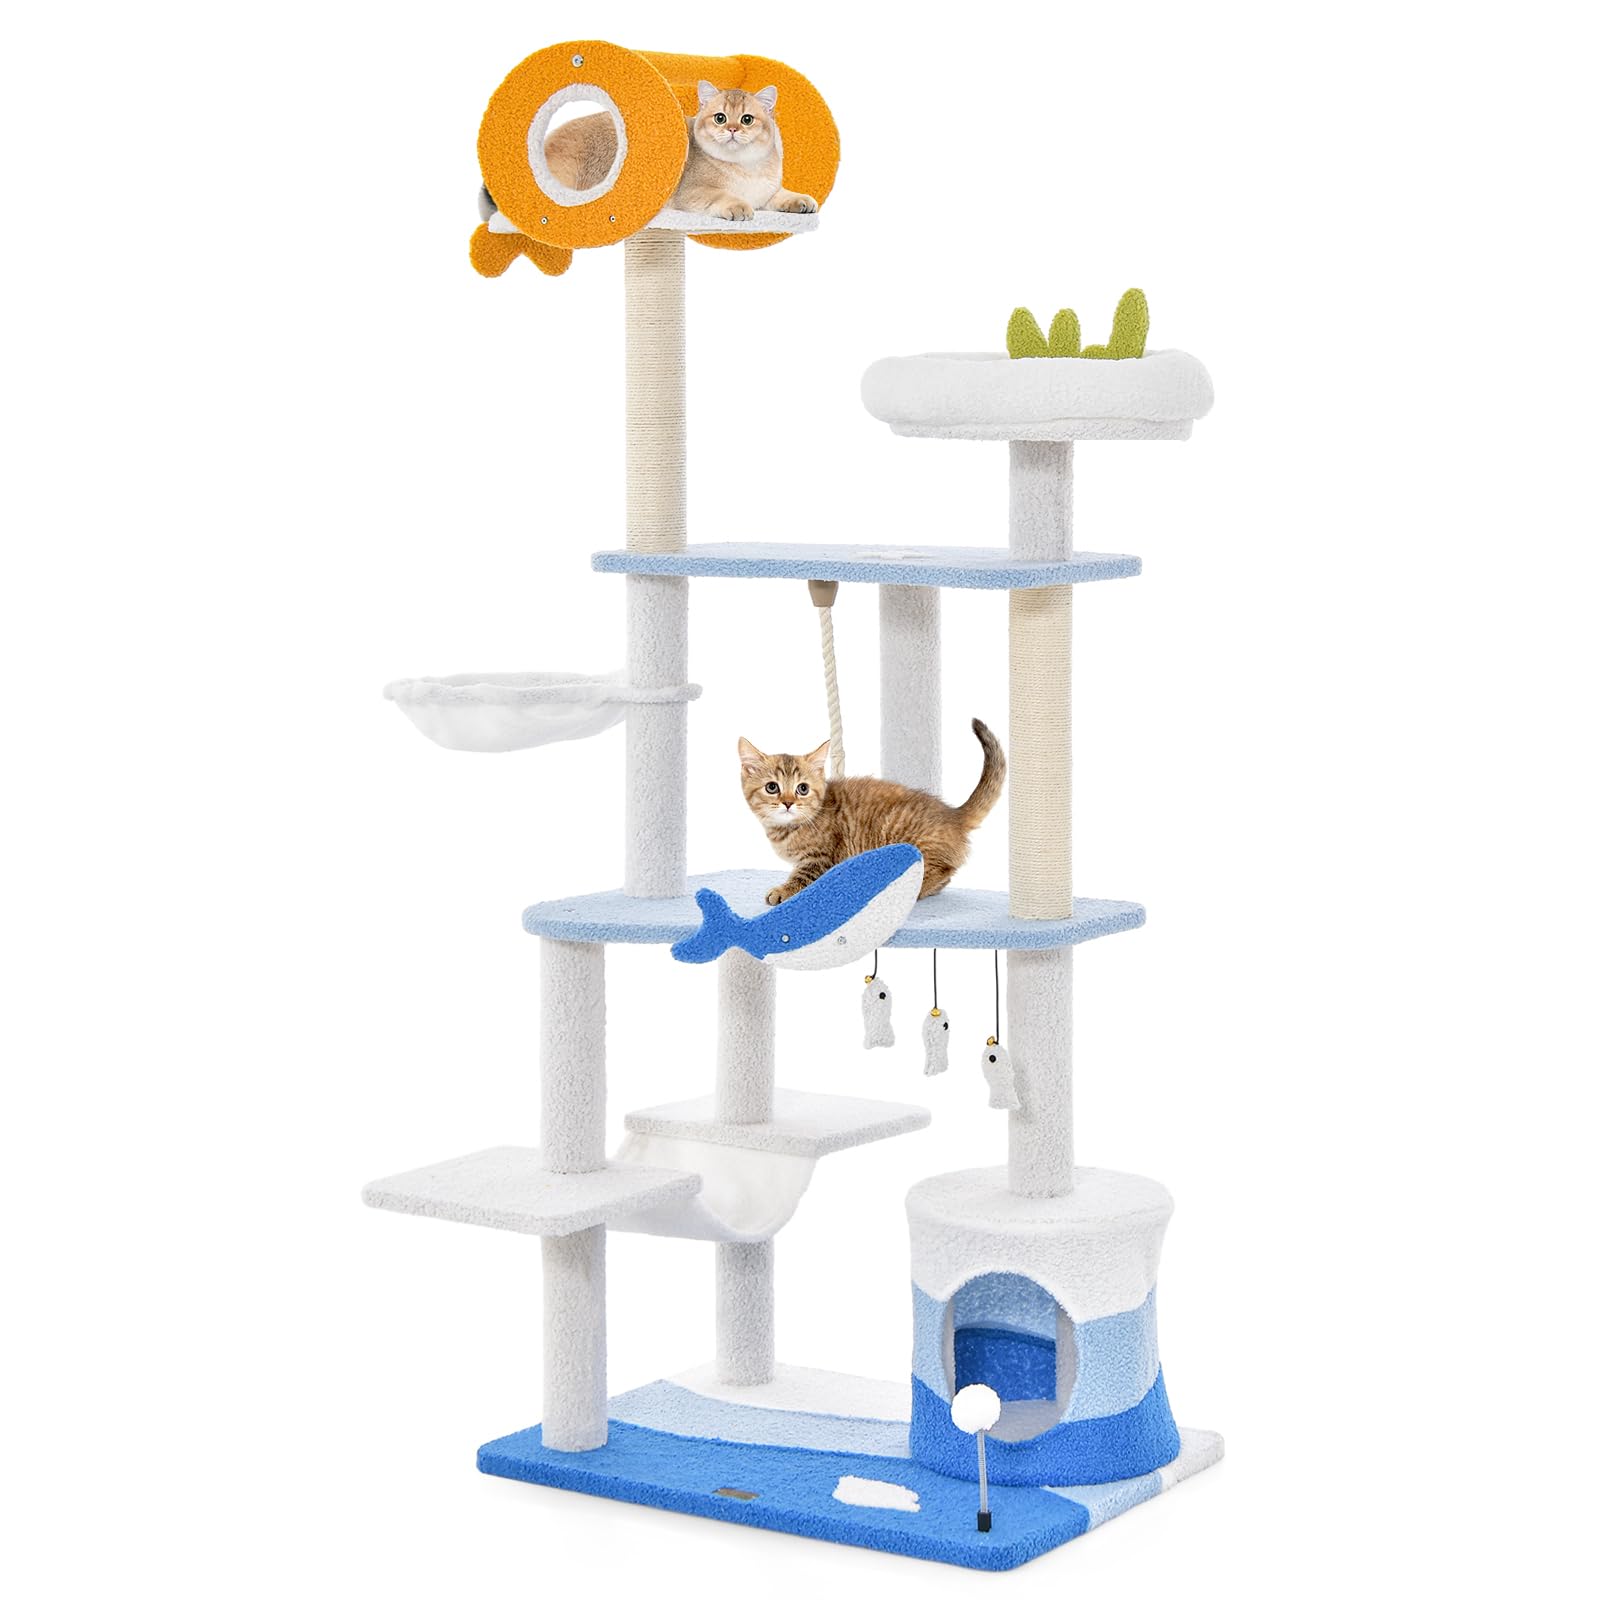 Tangkula Ocean-Themed Cat Tree, 3-Level Cat Tower with Sisal Scratching Posts, Condo, Perch, Hammock